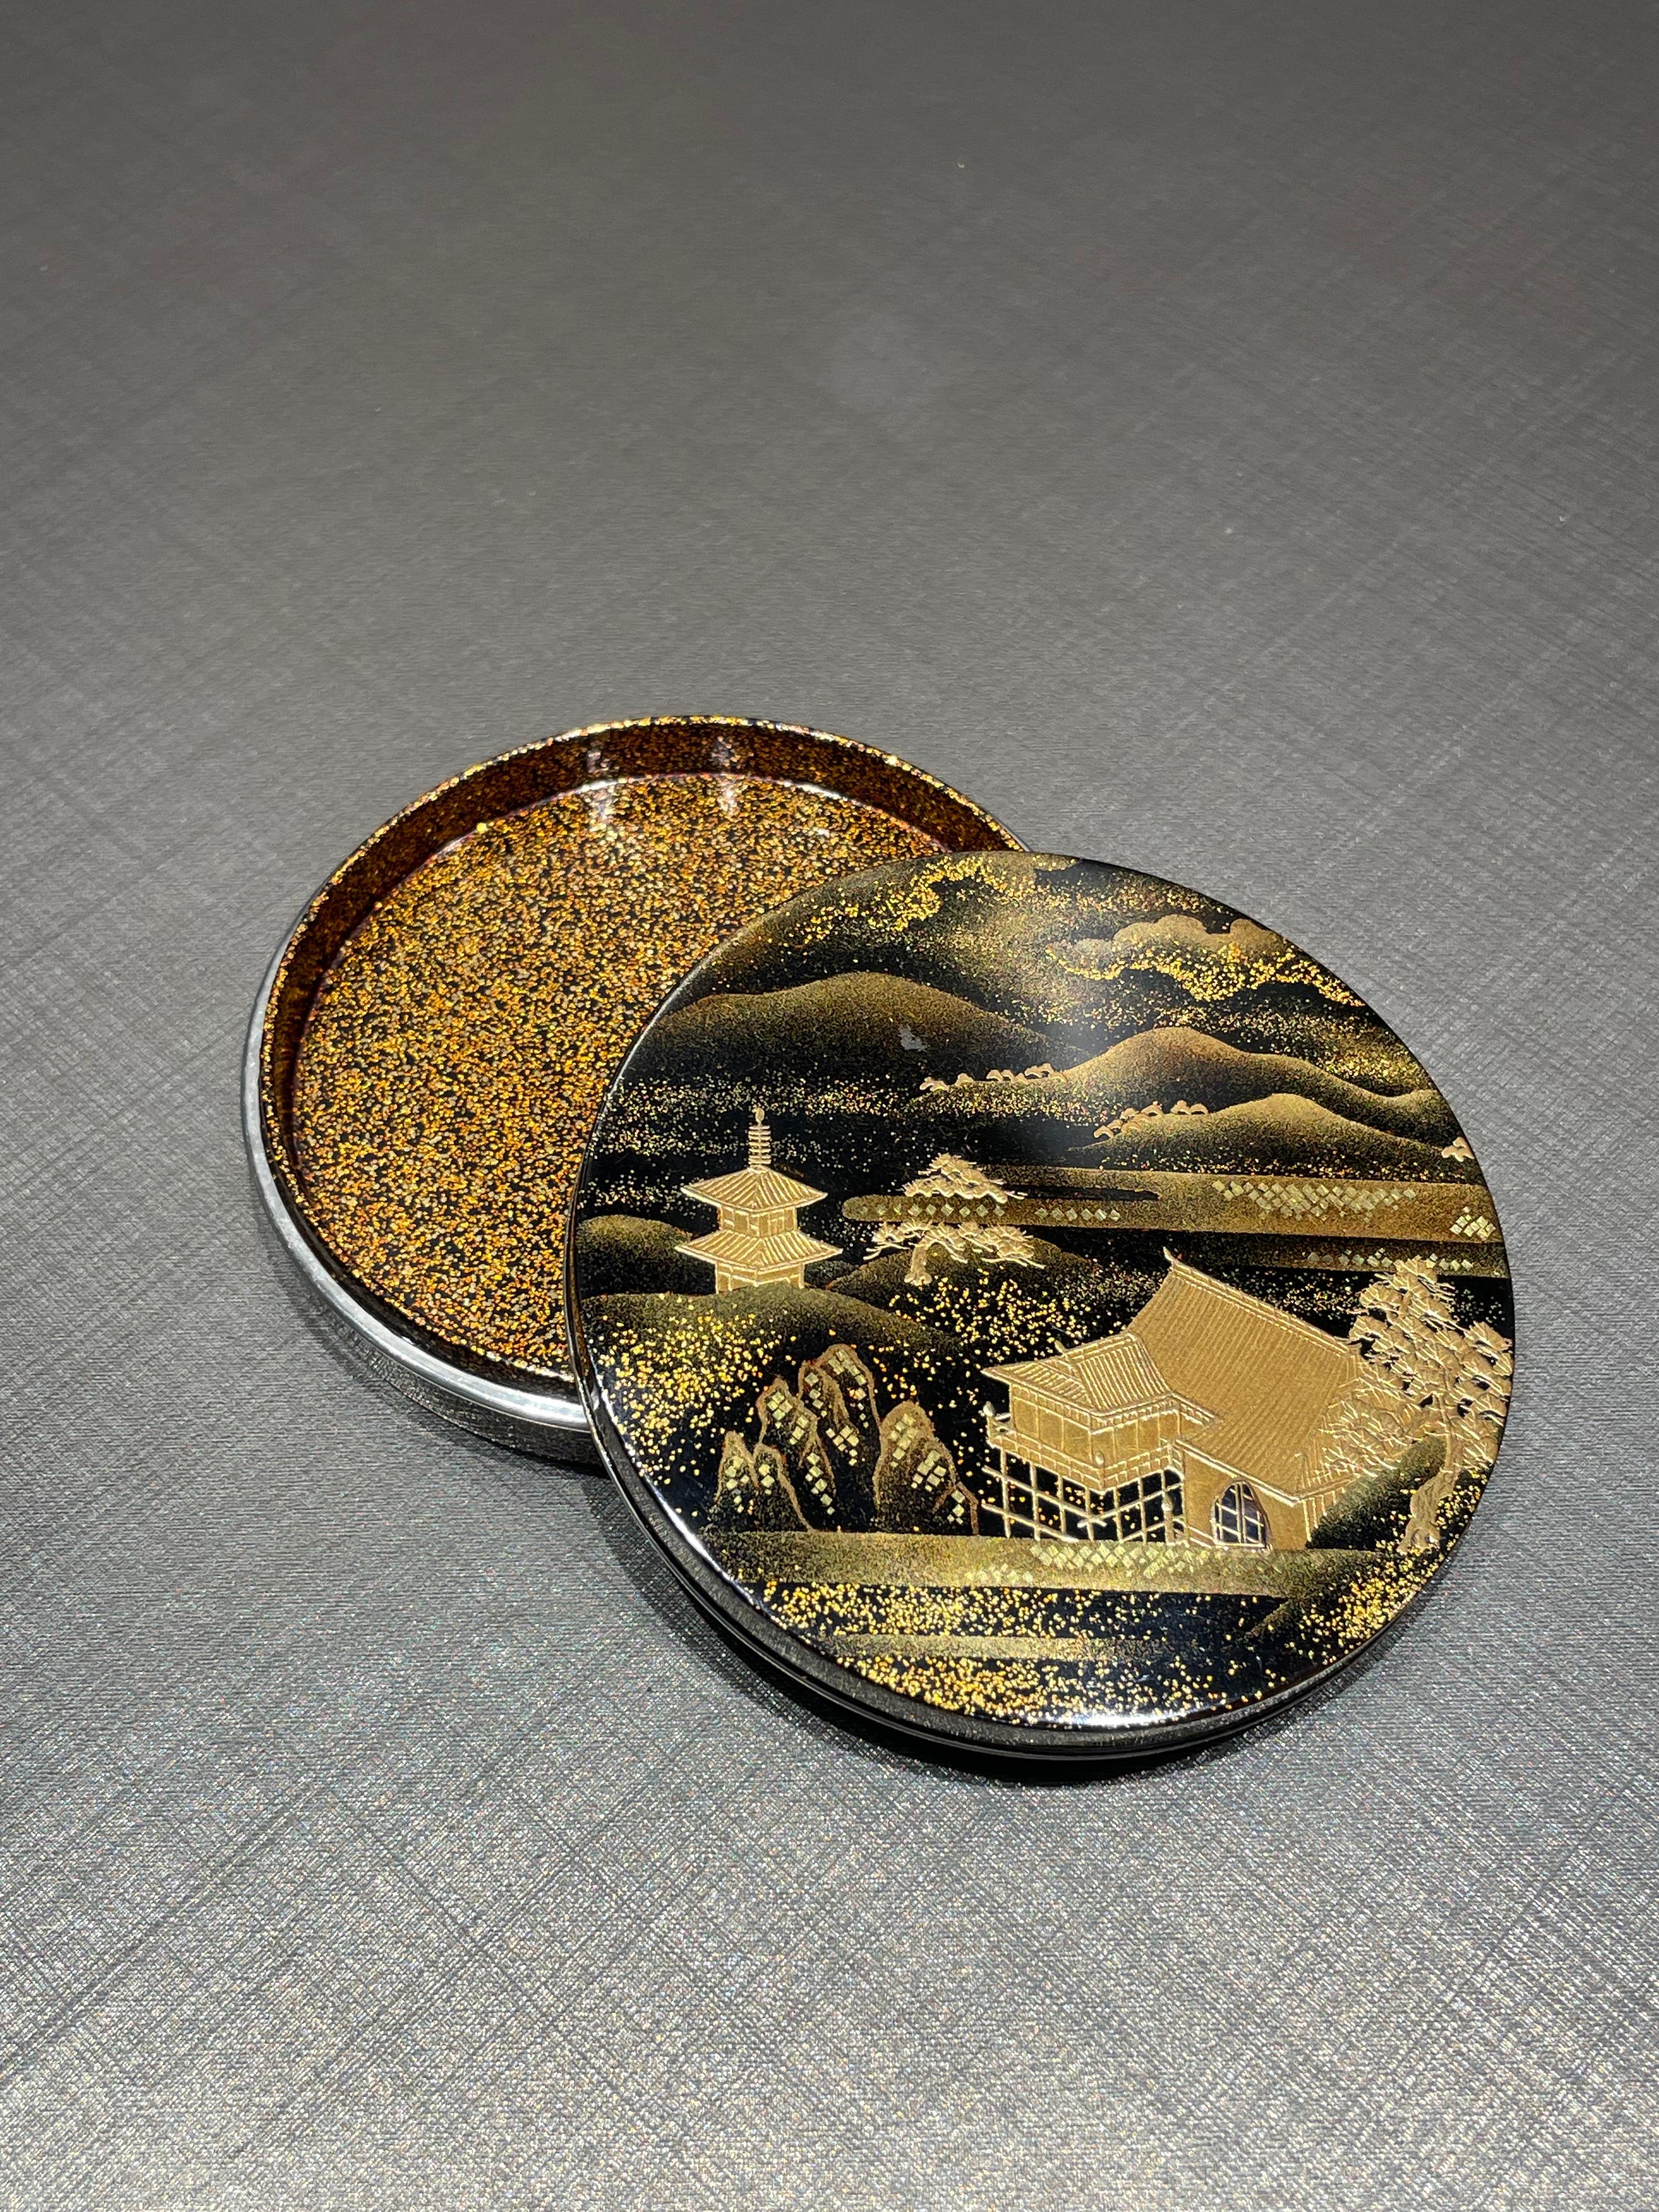 A work that shines with detailed expression typical of Japan.
The design expressed on the lid is the famous 